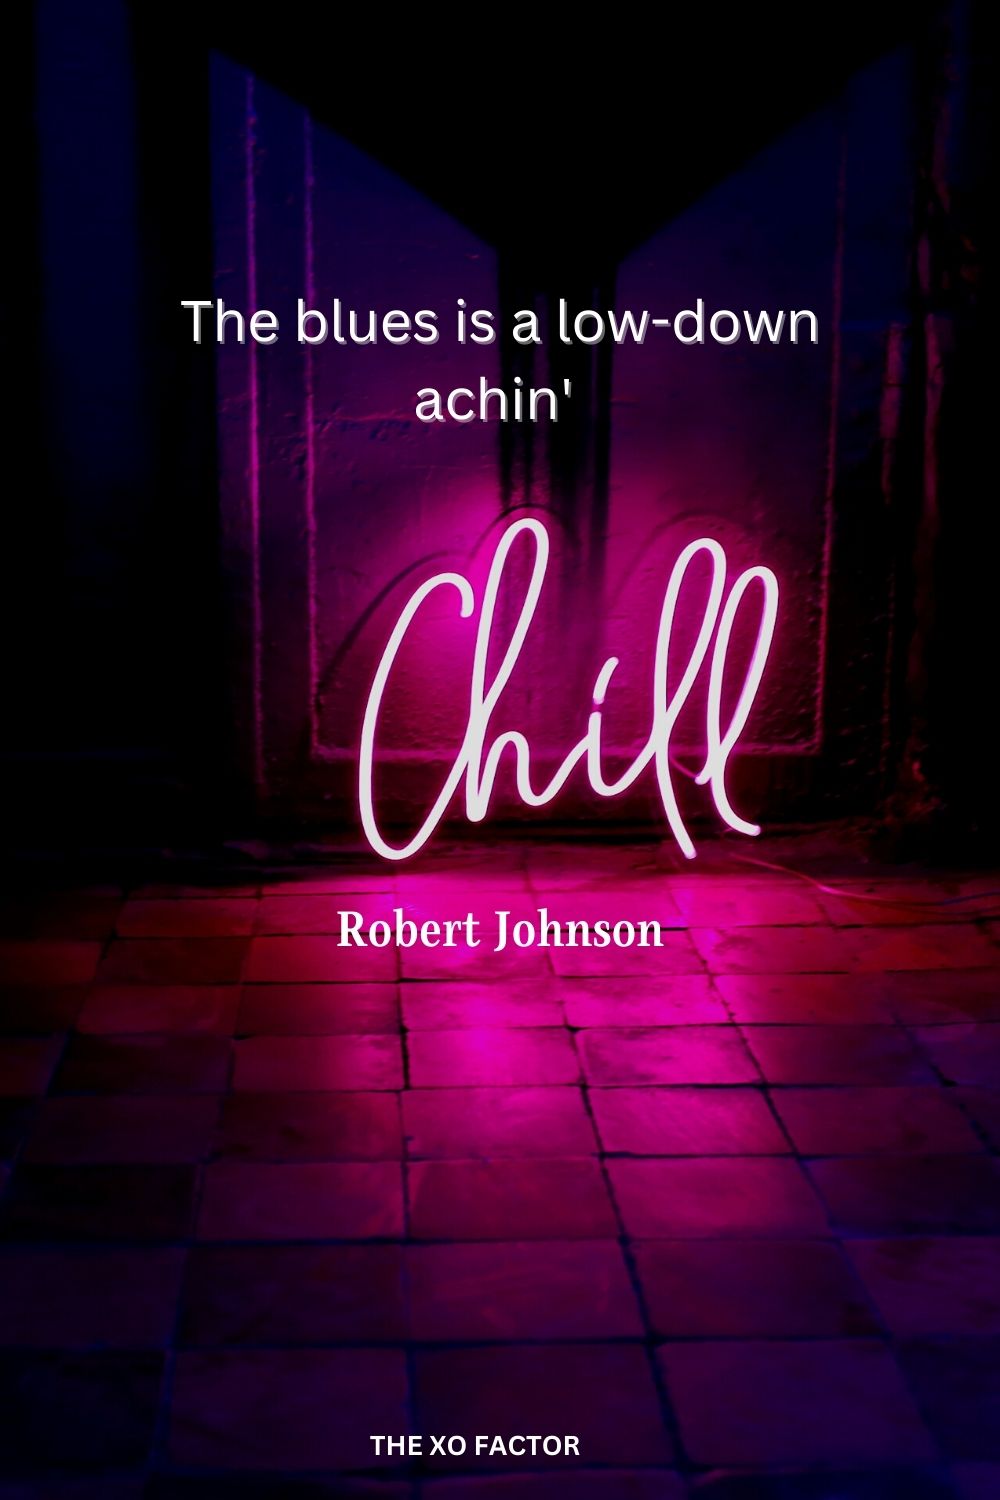 The blues is a low-down achin' chill.
Robert Johnson